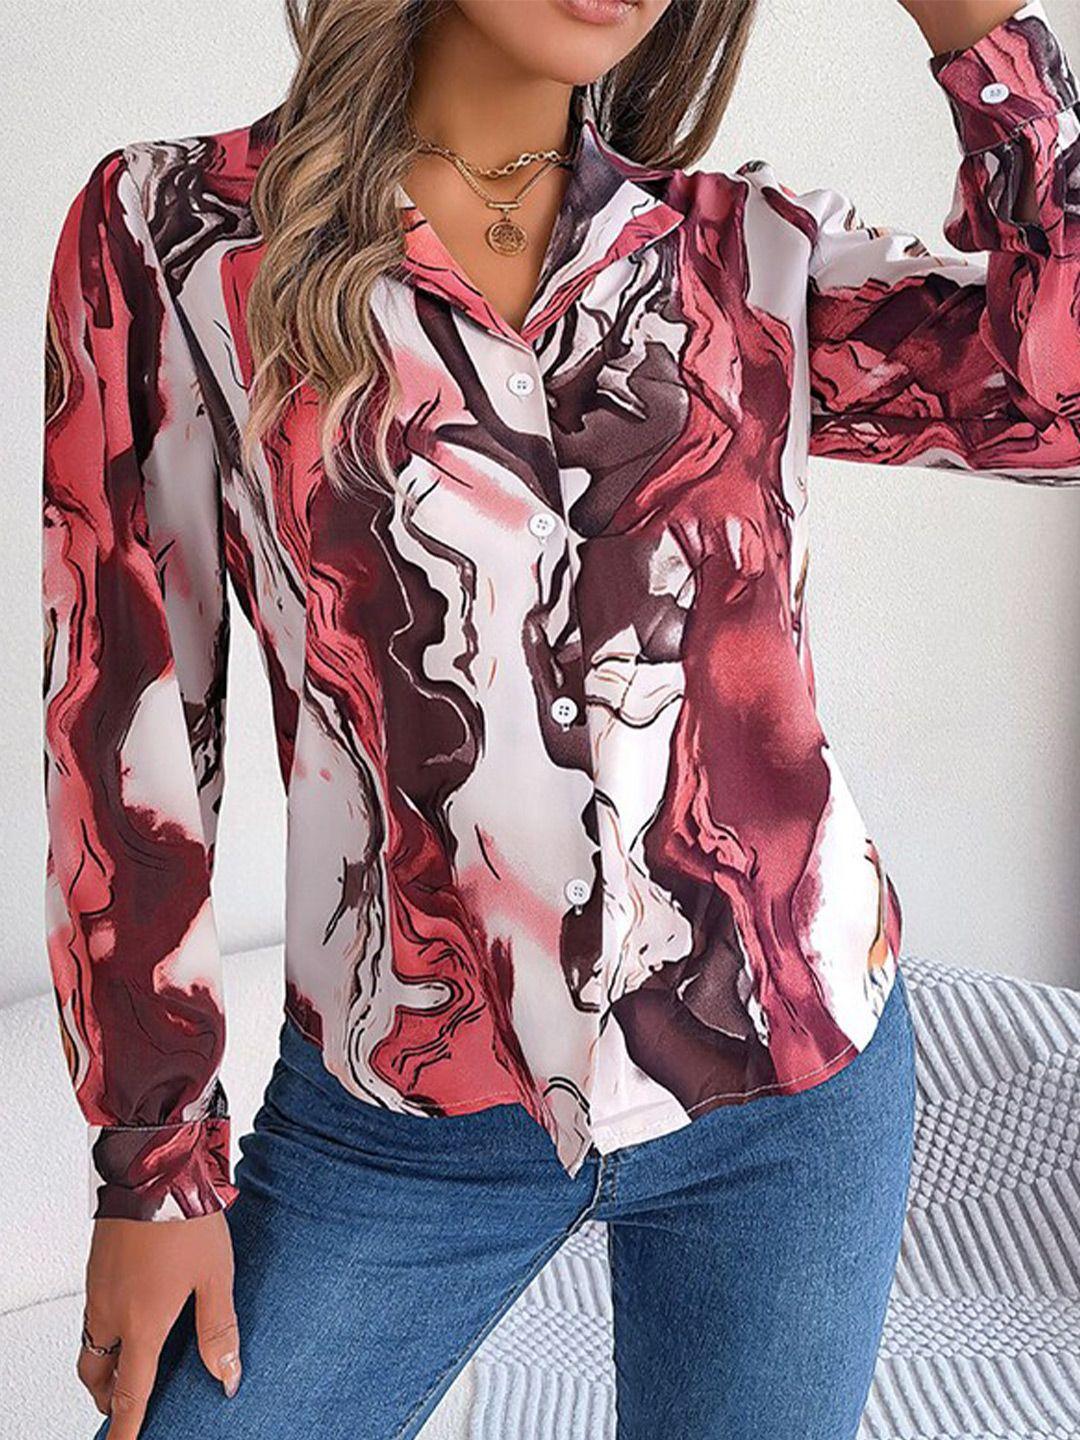 stylecast red & white abstract printed casual shirt